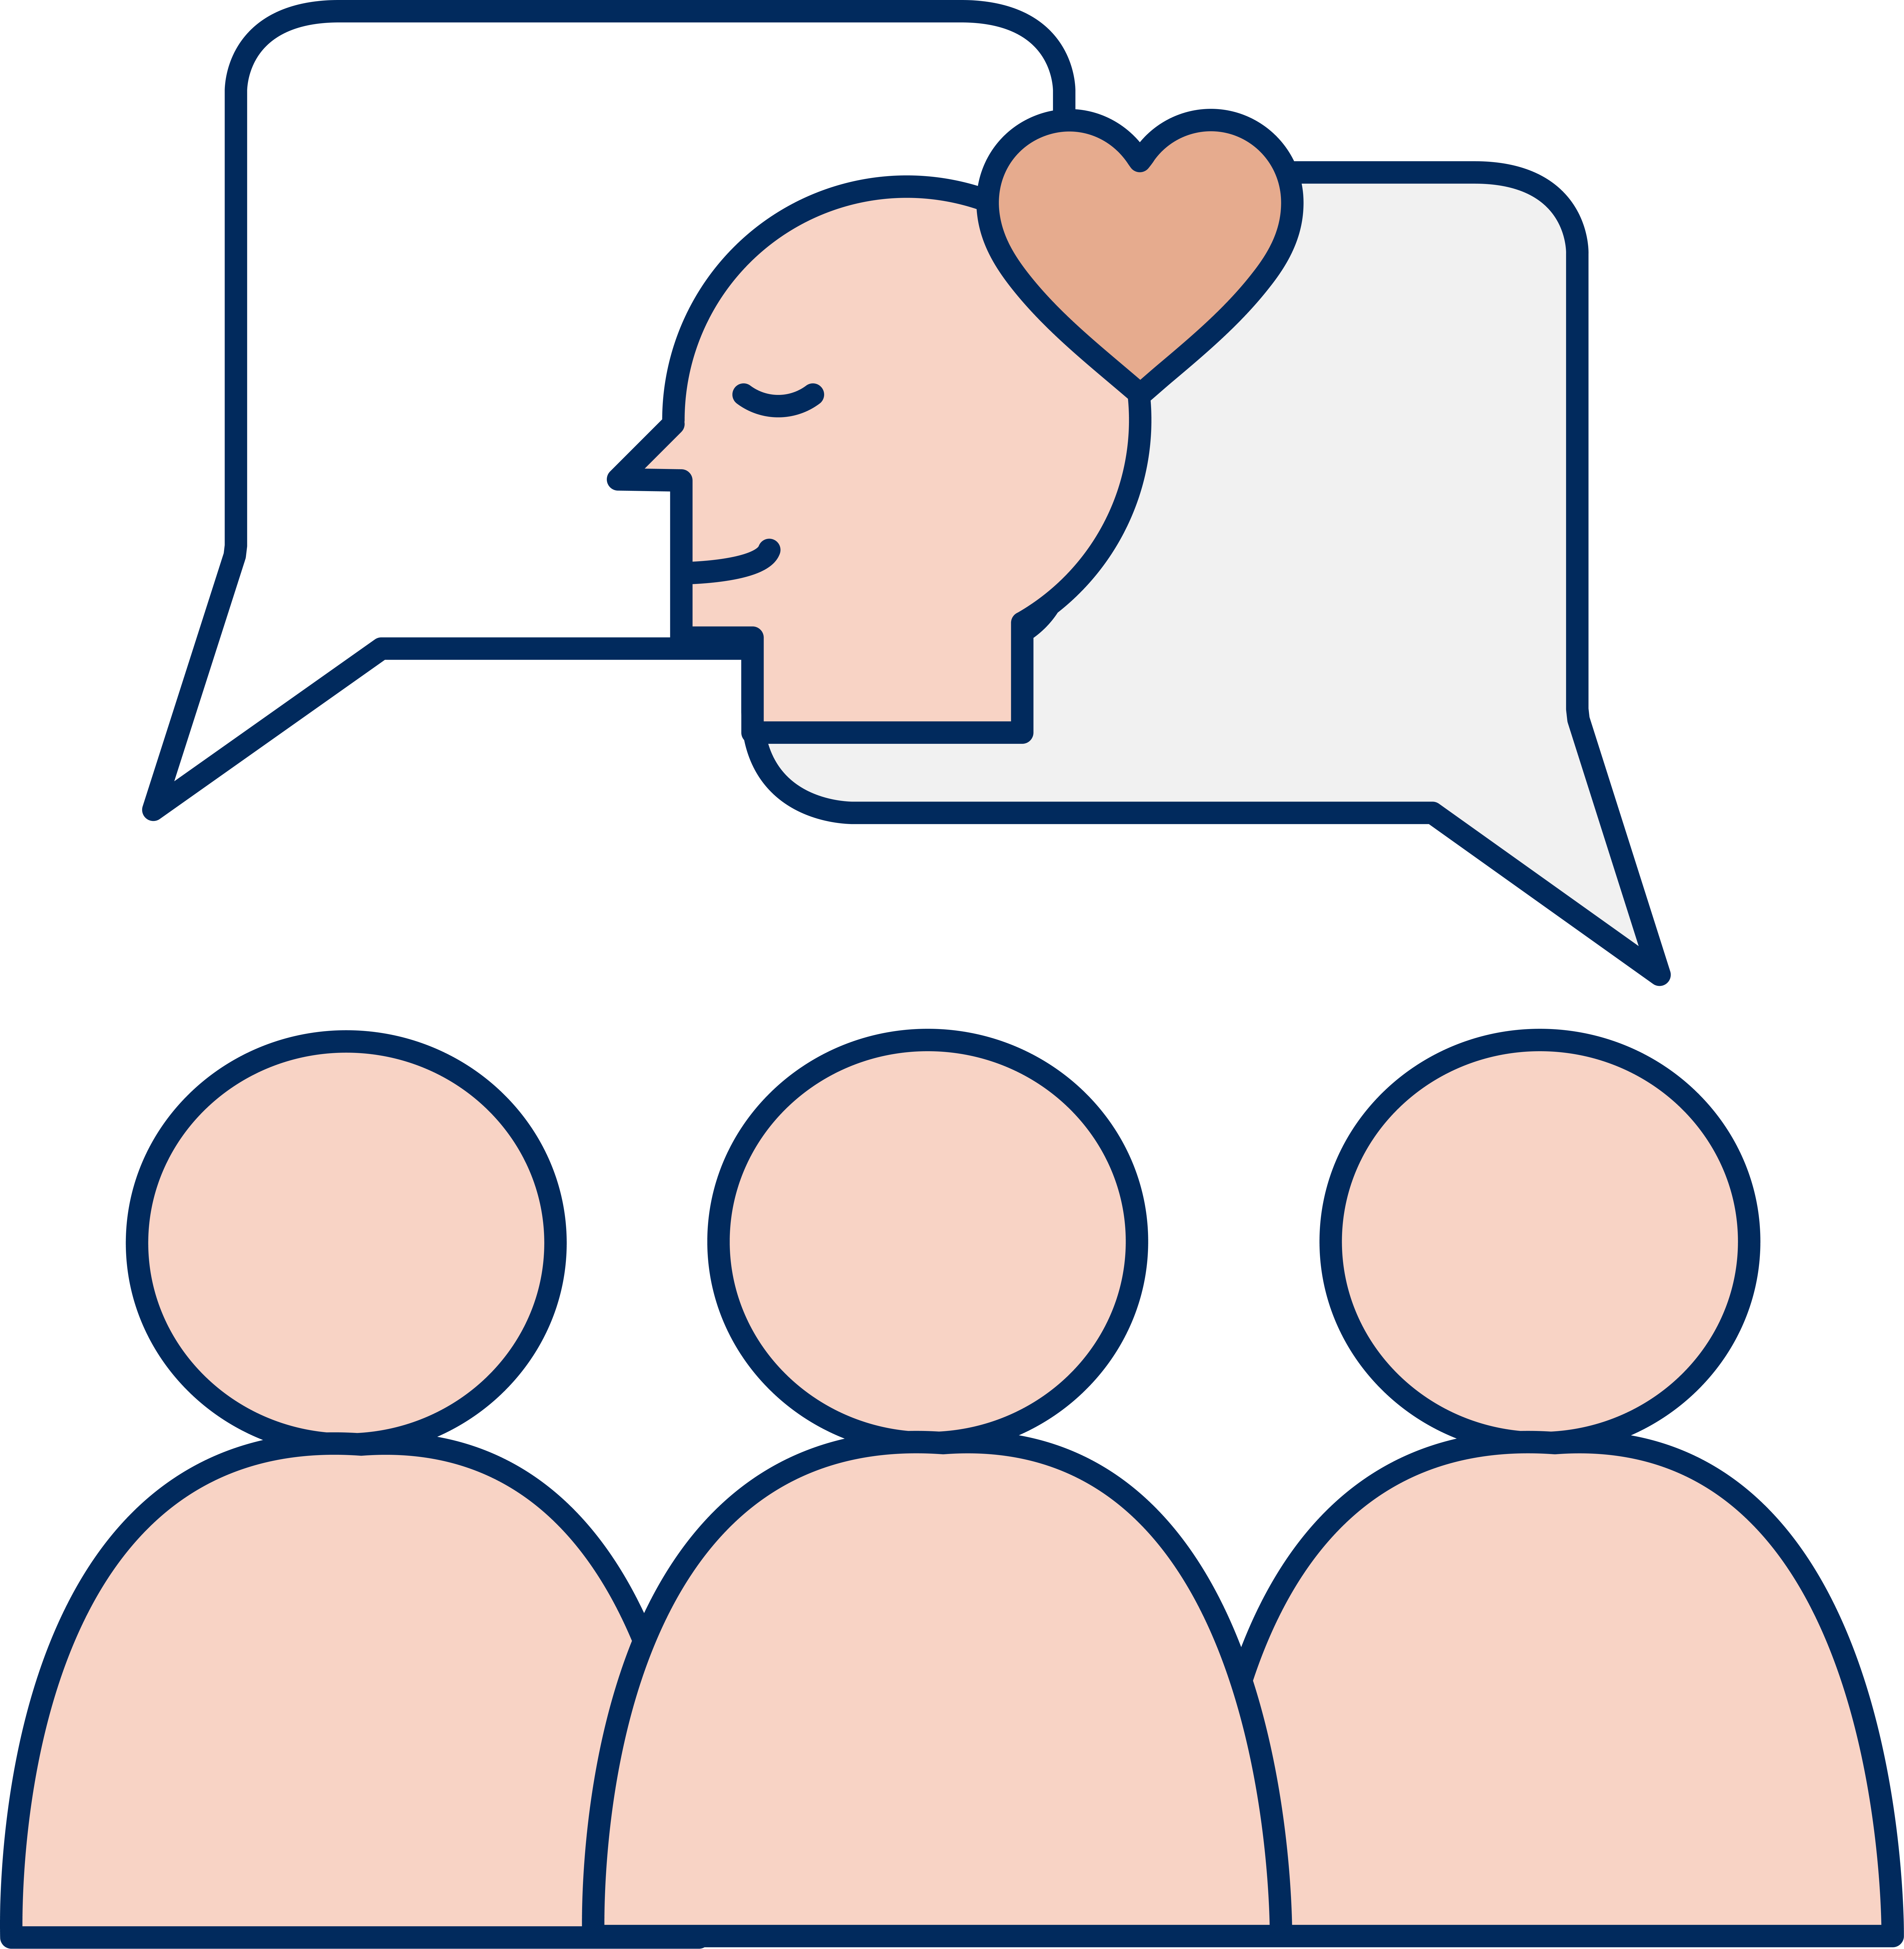 Three people with speech bubbles talking about mental health - head and heart